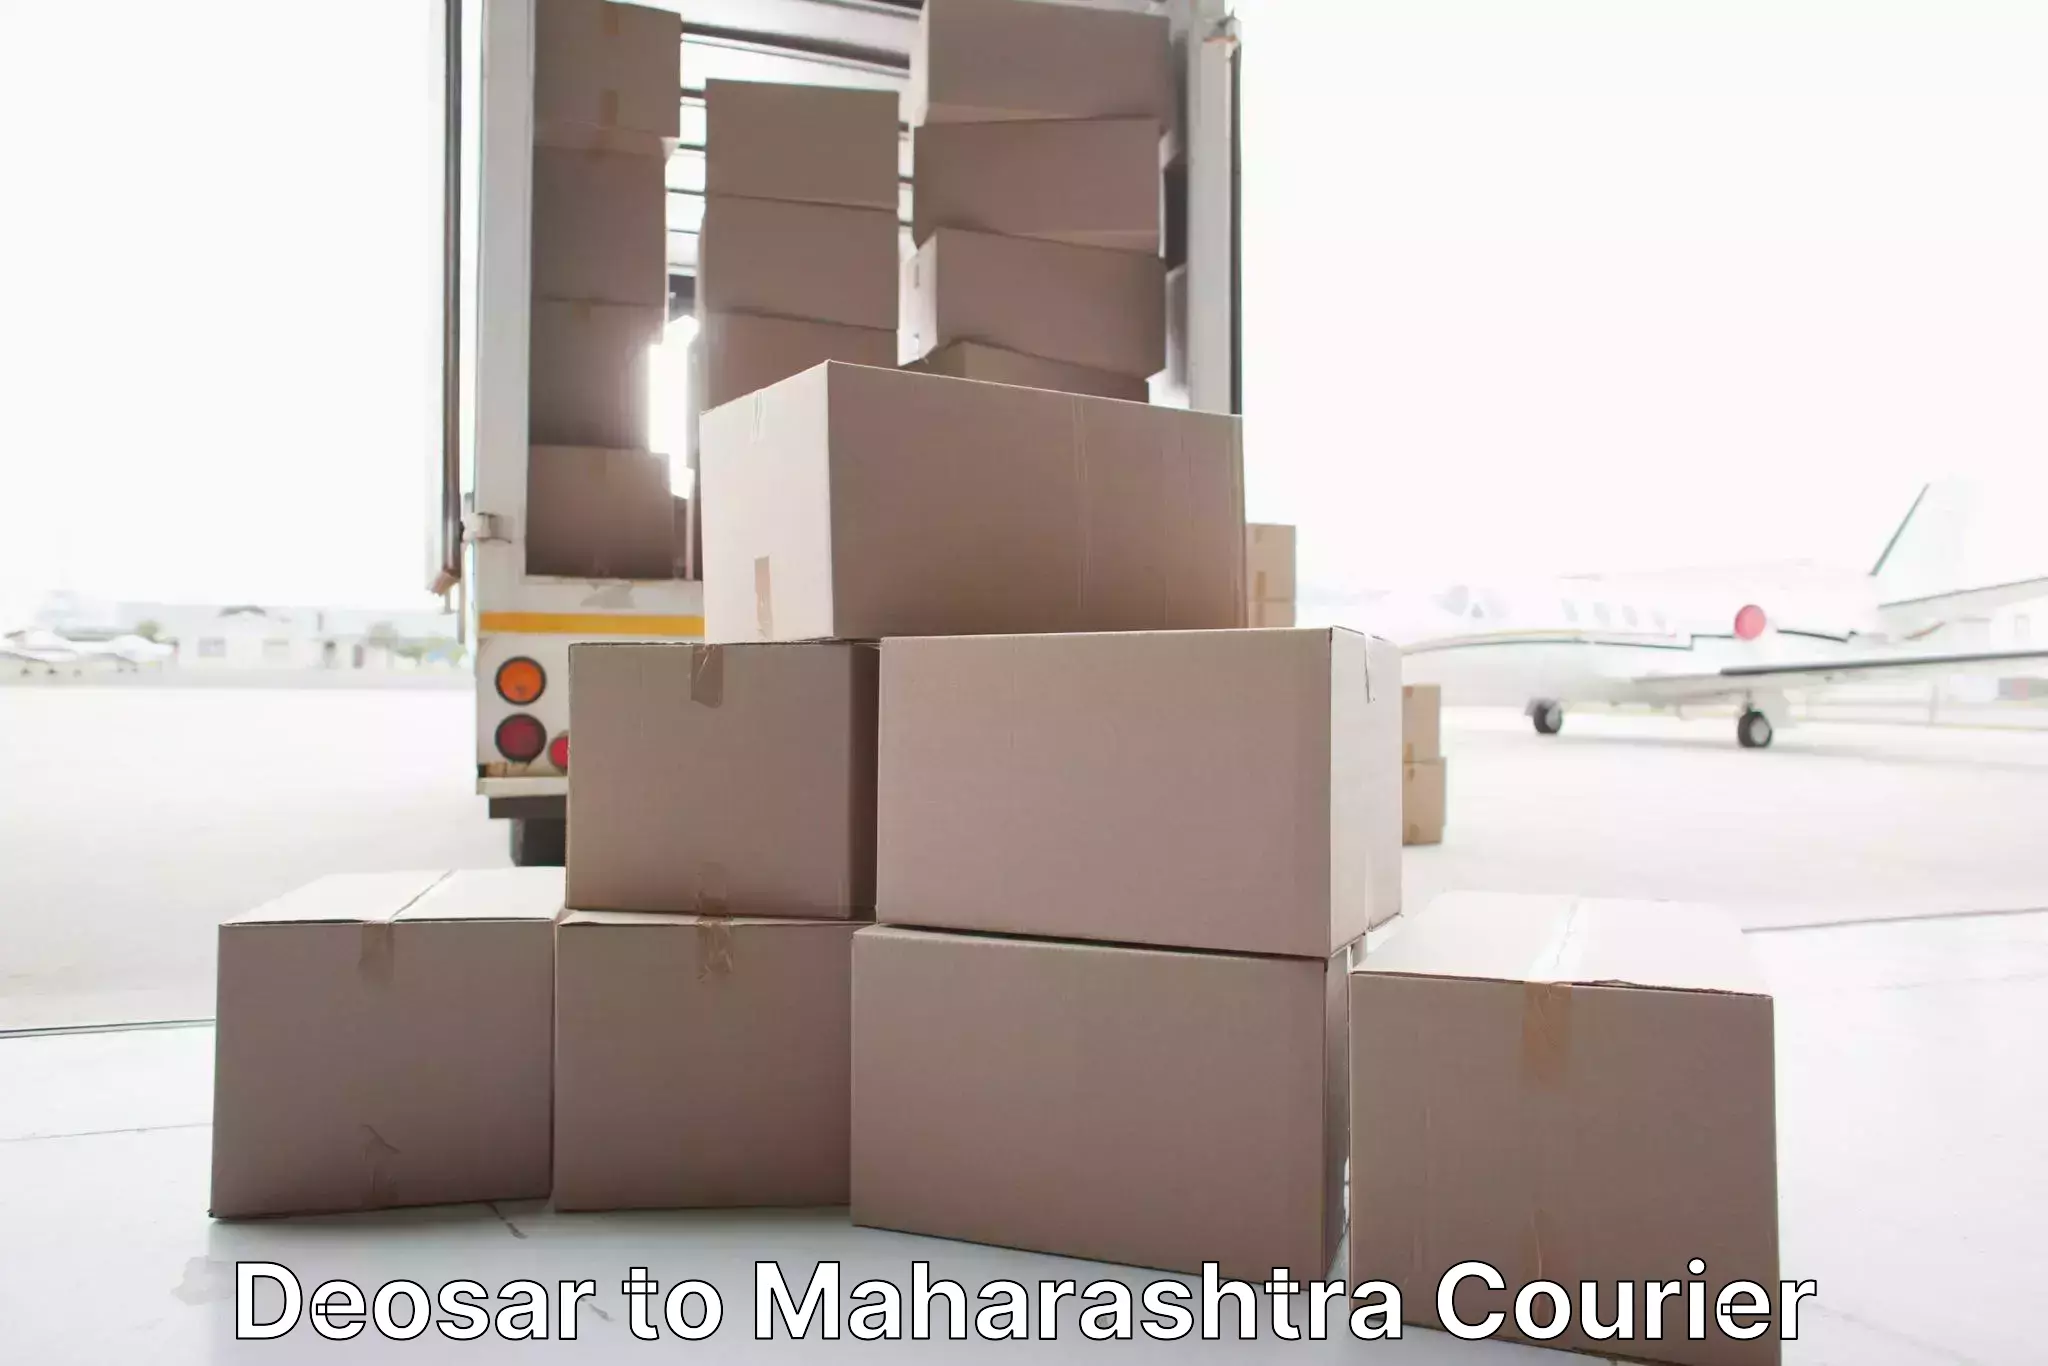 Quality relocation services in Deosar to Khandala Pune